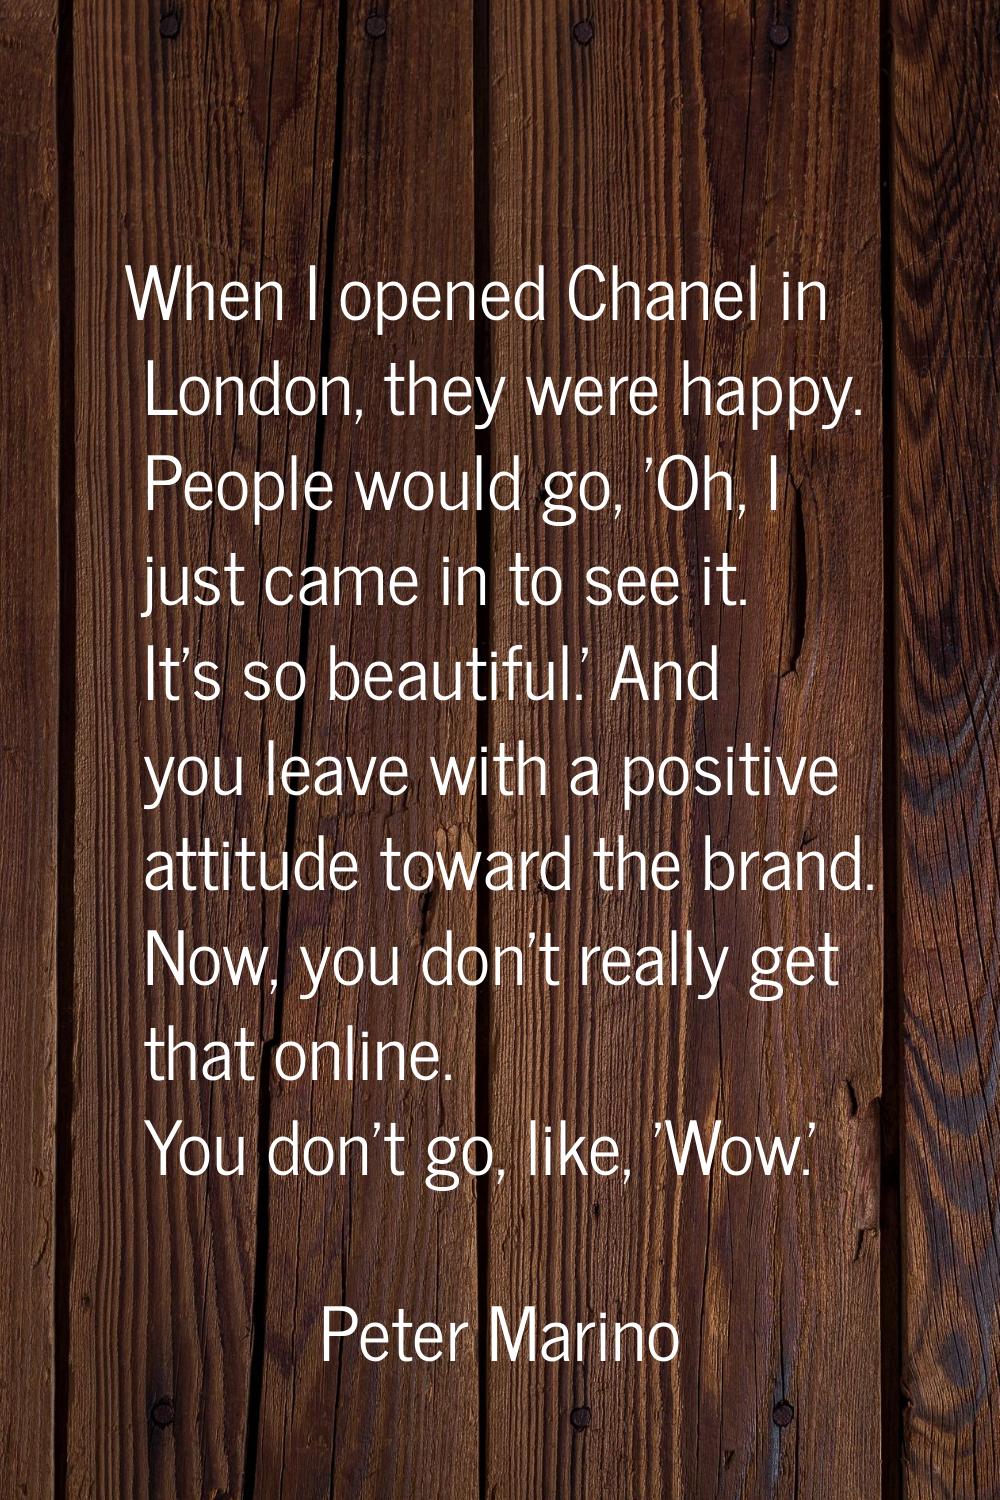 When I opened Chanel in London, they were happy. People would go, 'Oh, I just came in to see it. It